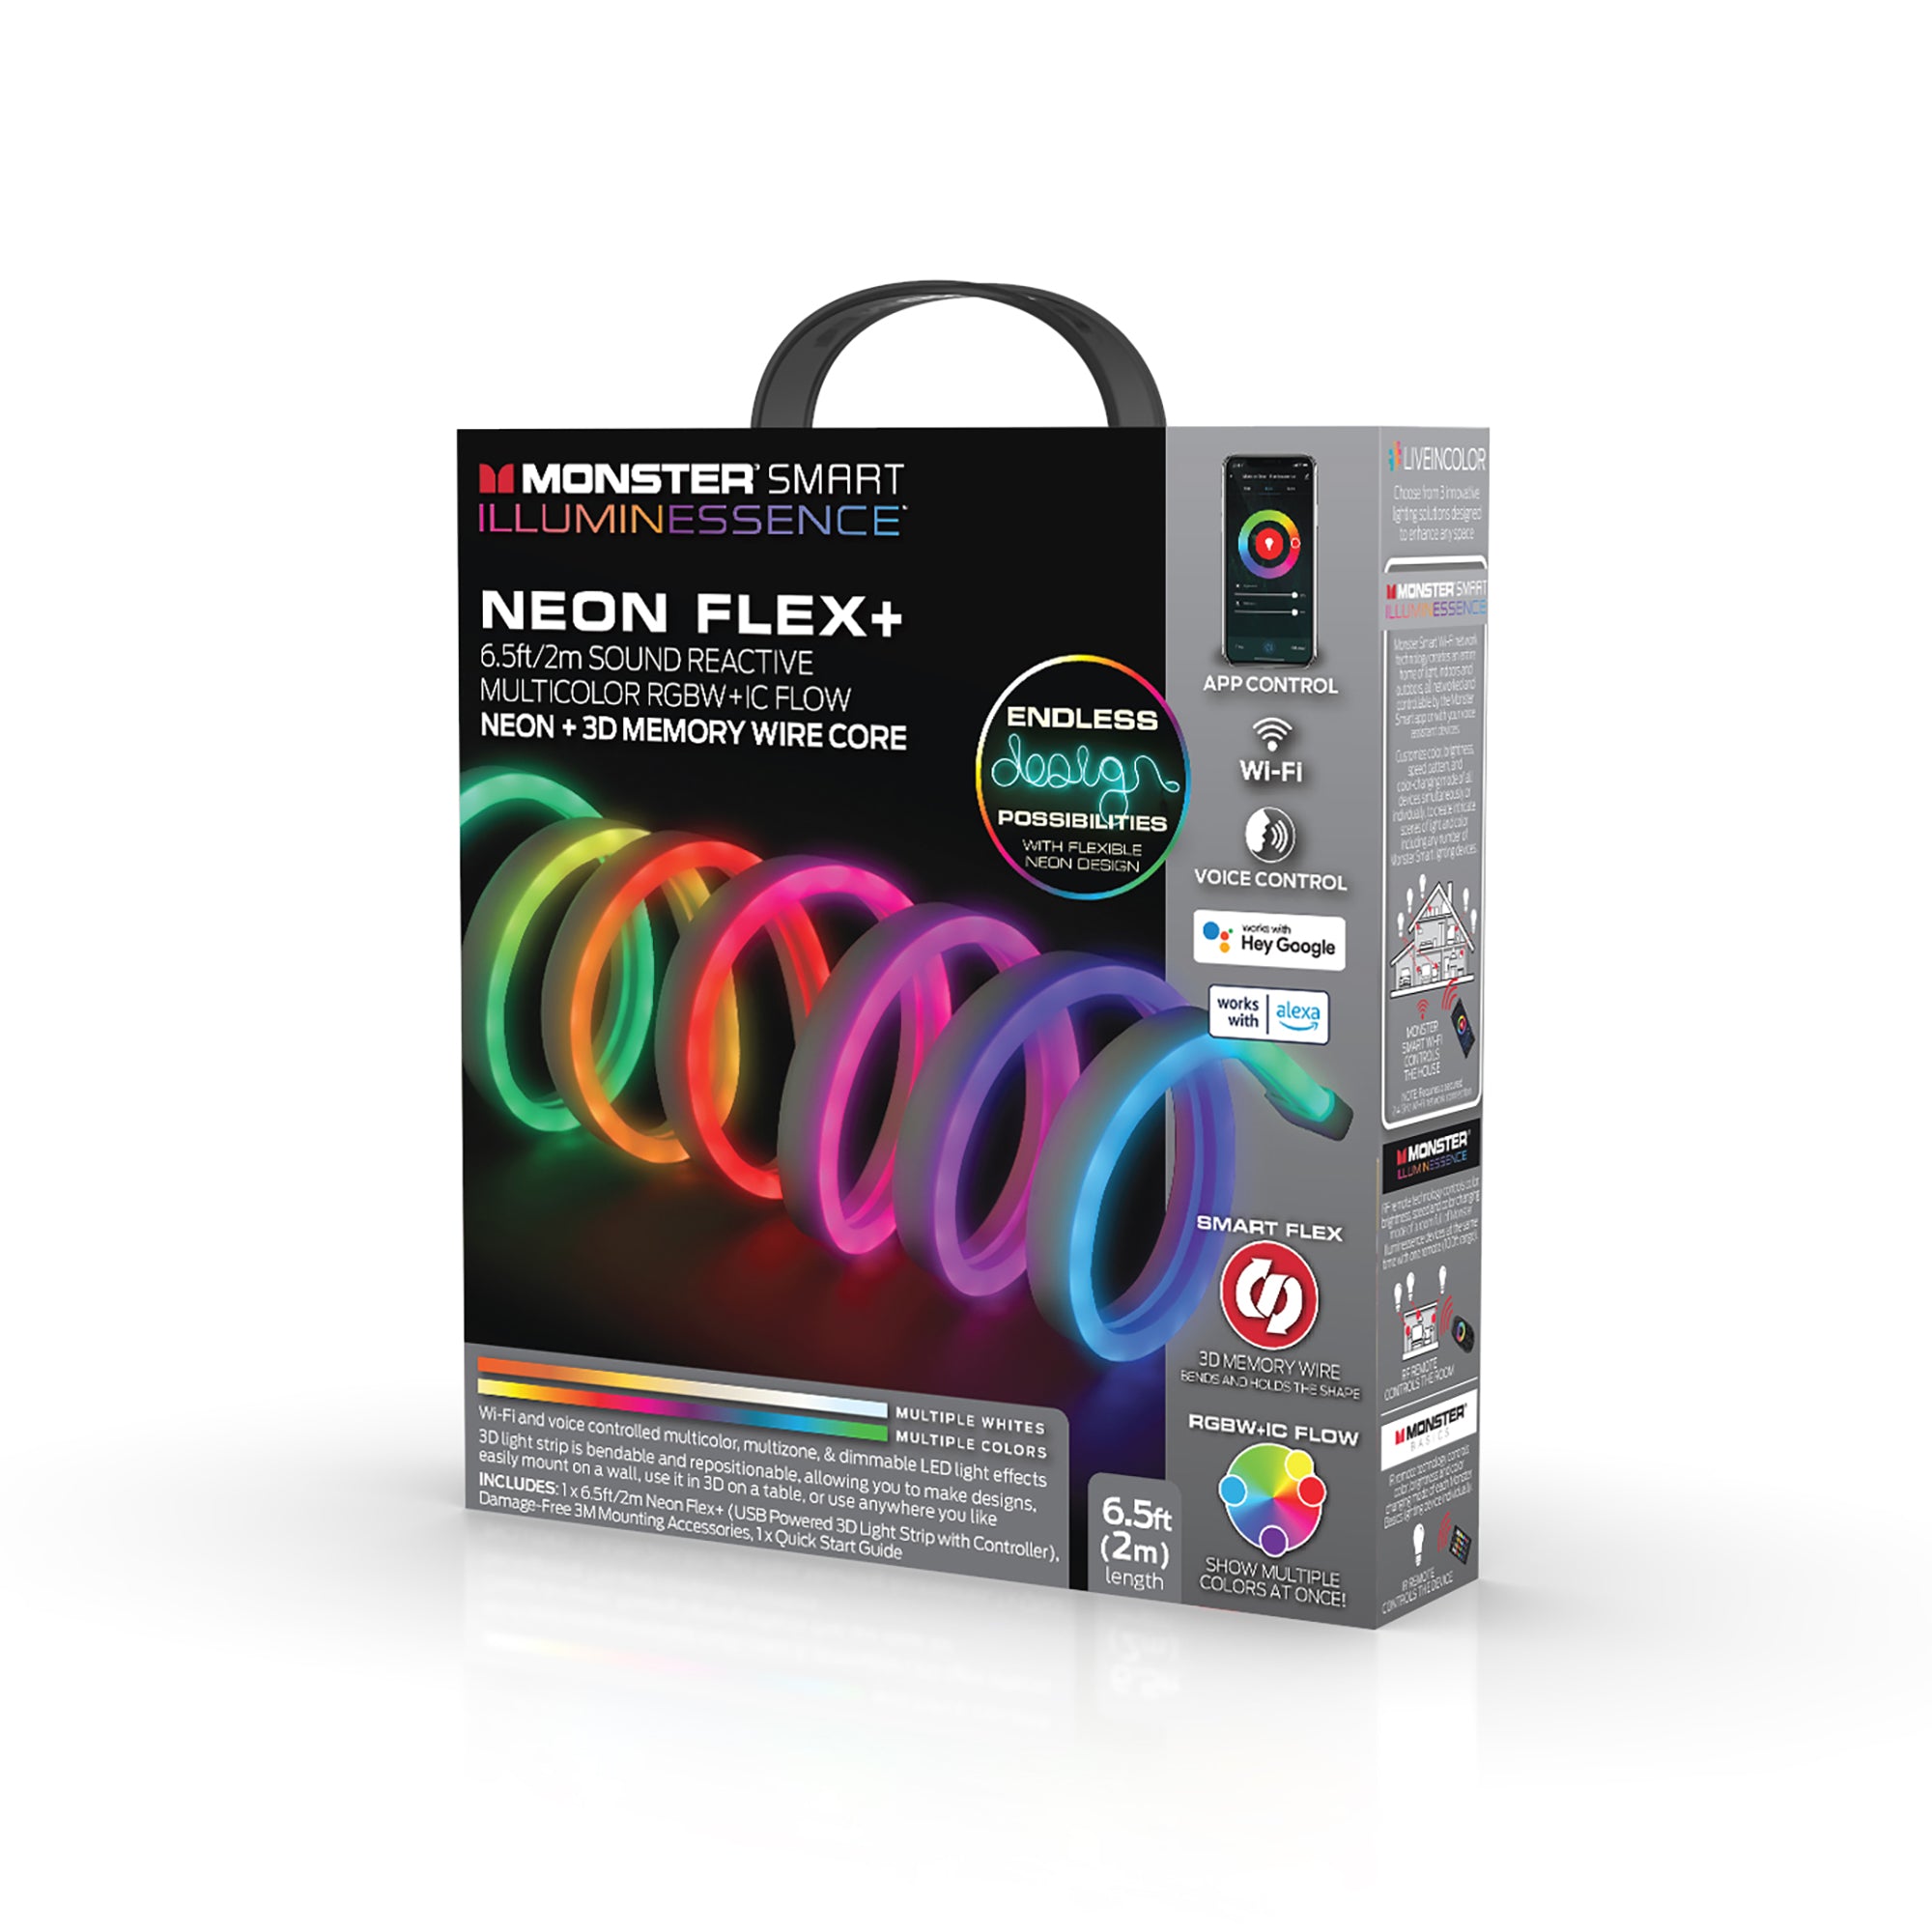 MONSTER Smart FLEX+ Neon and 3D Memory Wire Core 2m LED Light Strip